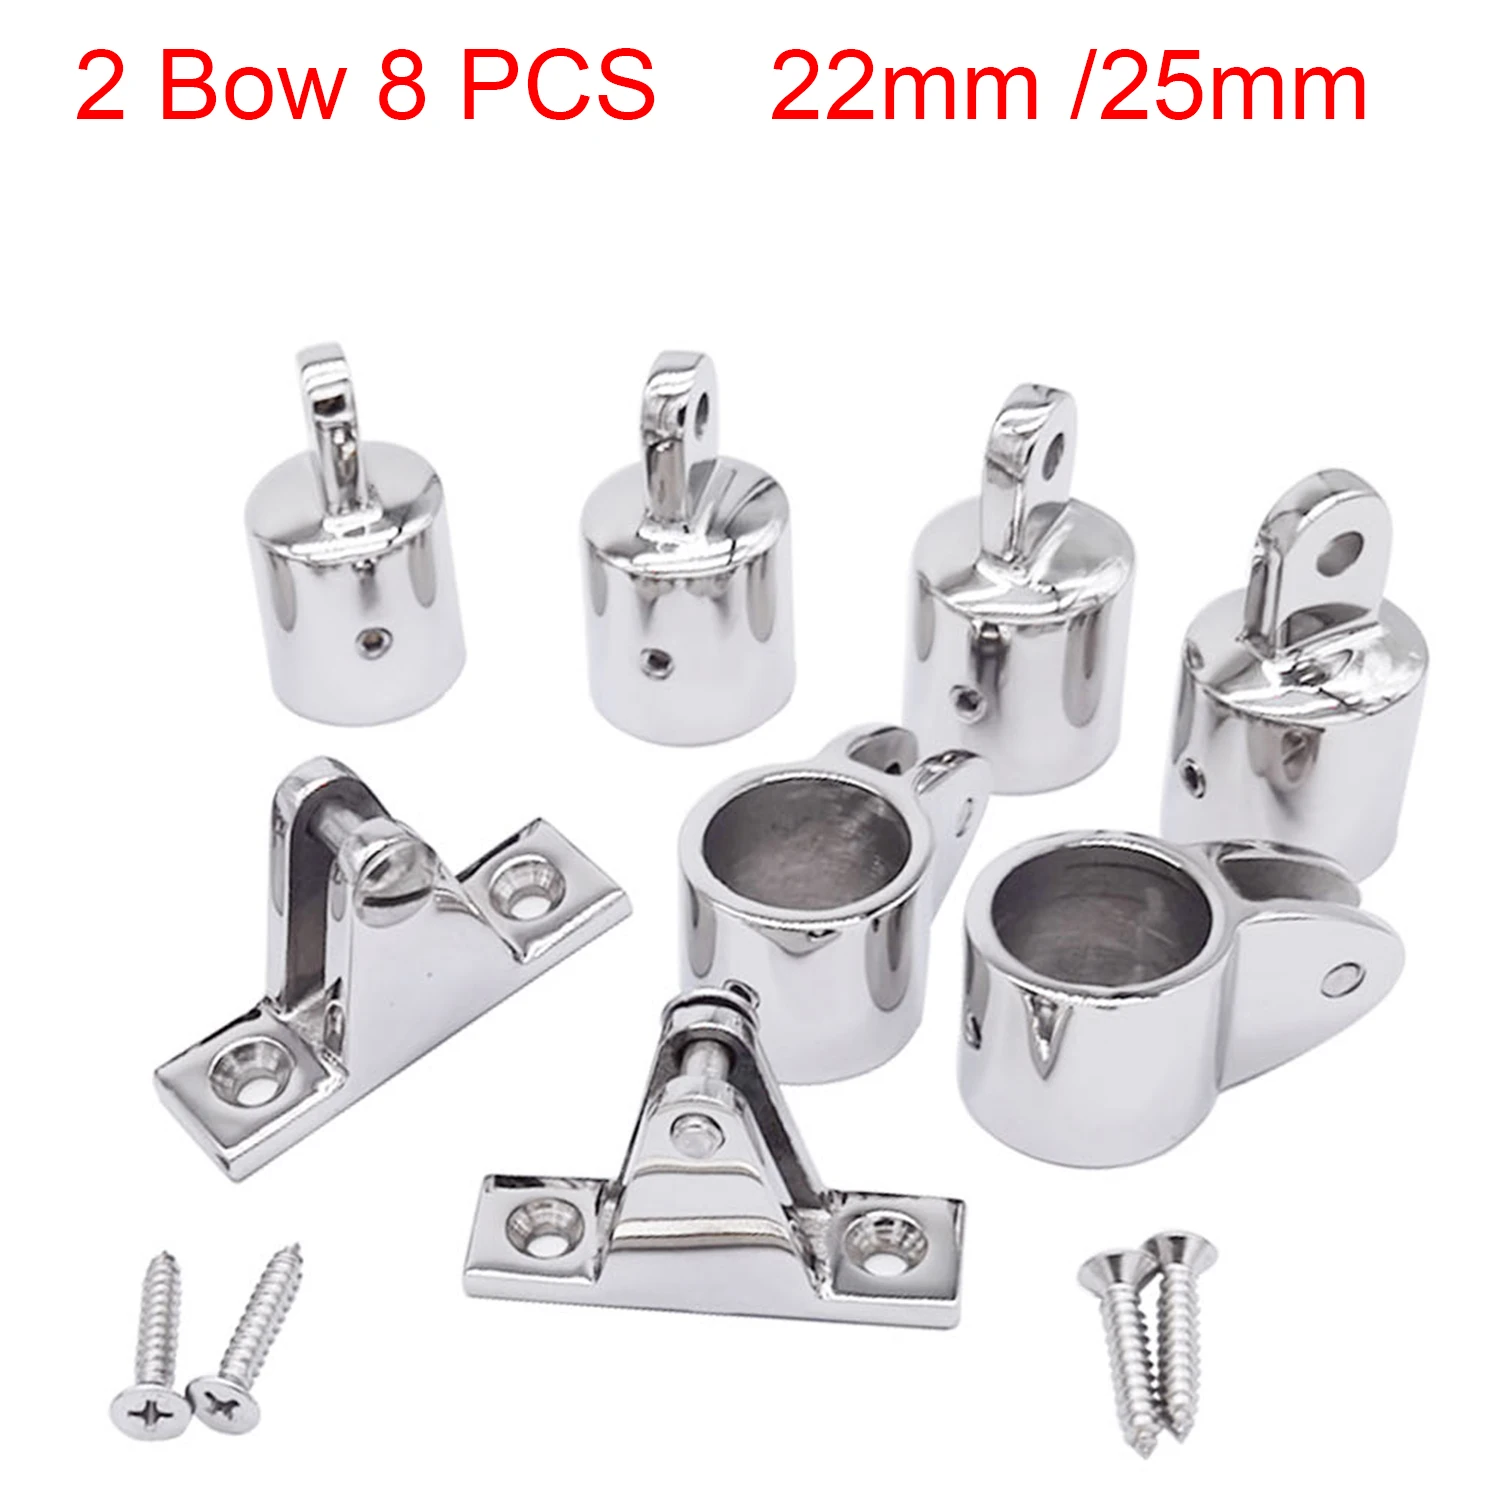 8 PCS Marine 316 Stainless Steel 2-Bow Bimini Top Hardware Fitting Set Deck Hinge Jaw Slide Eye End Fitting for 22/25mm Pipe 1pc boat bimini top swivel deck hinge marine 316 stainless steel with rubber pad for yachts car trailer canopy hardware fitting